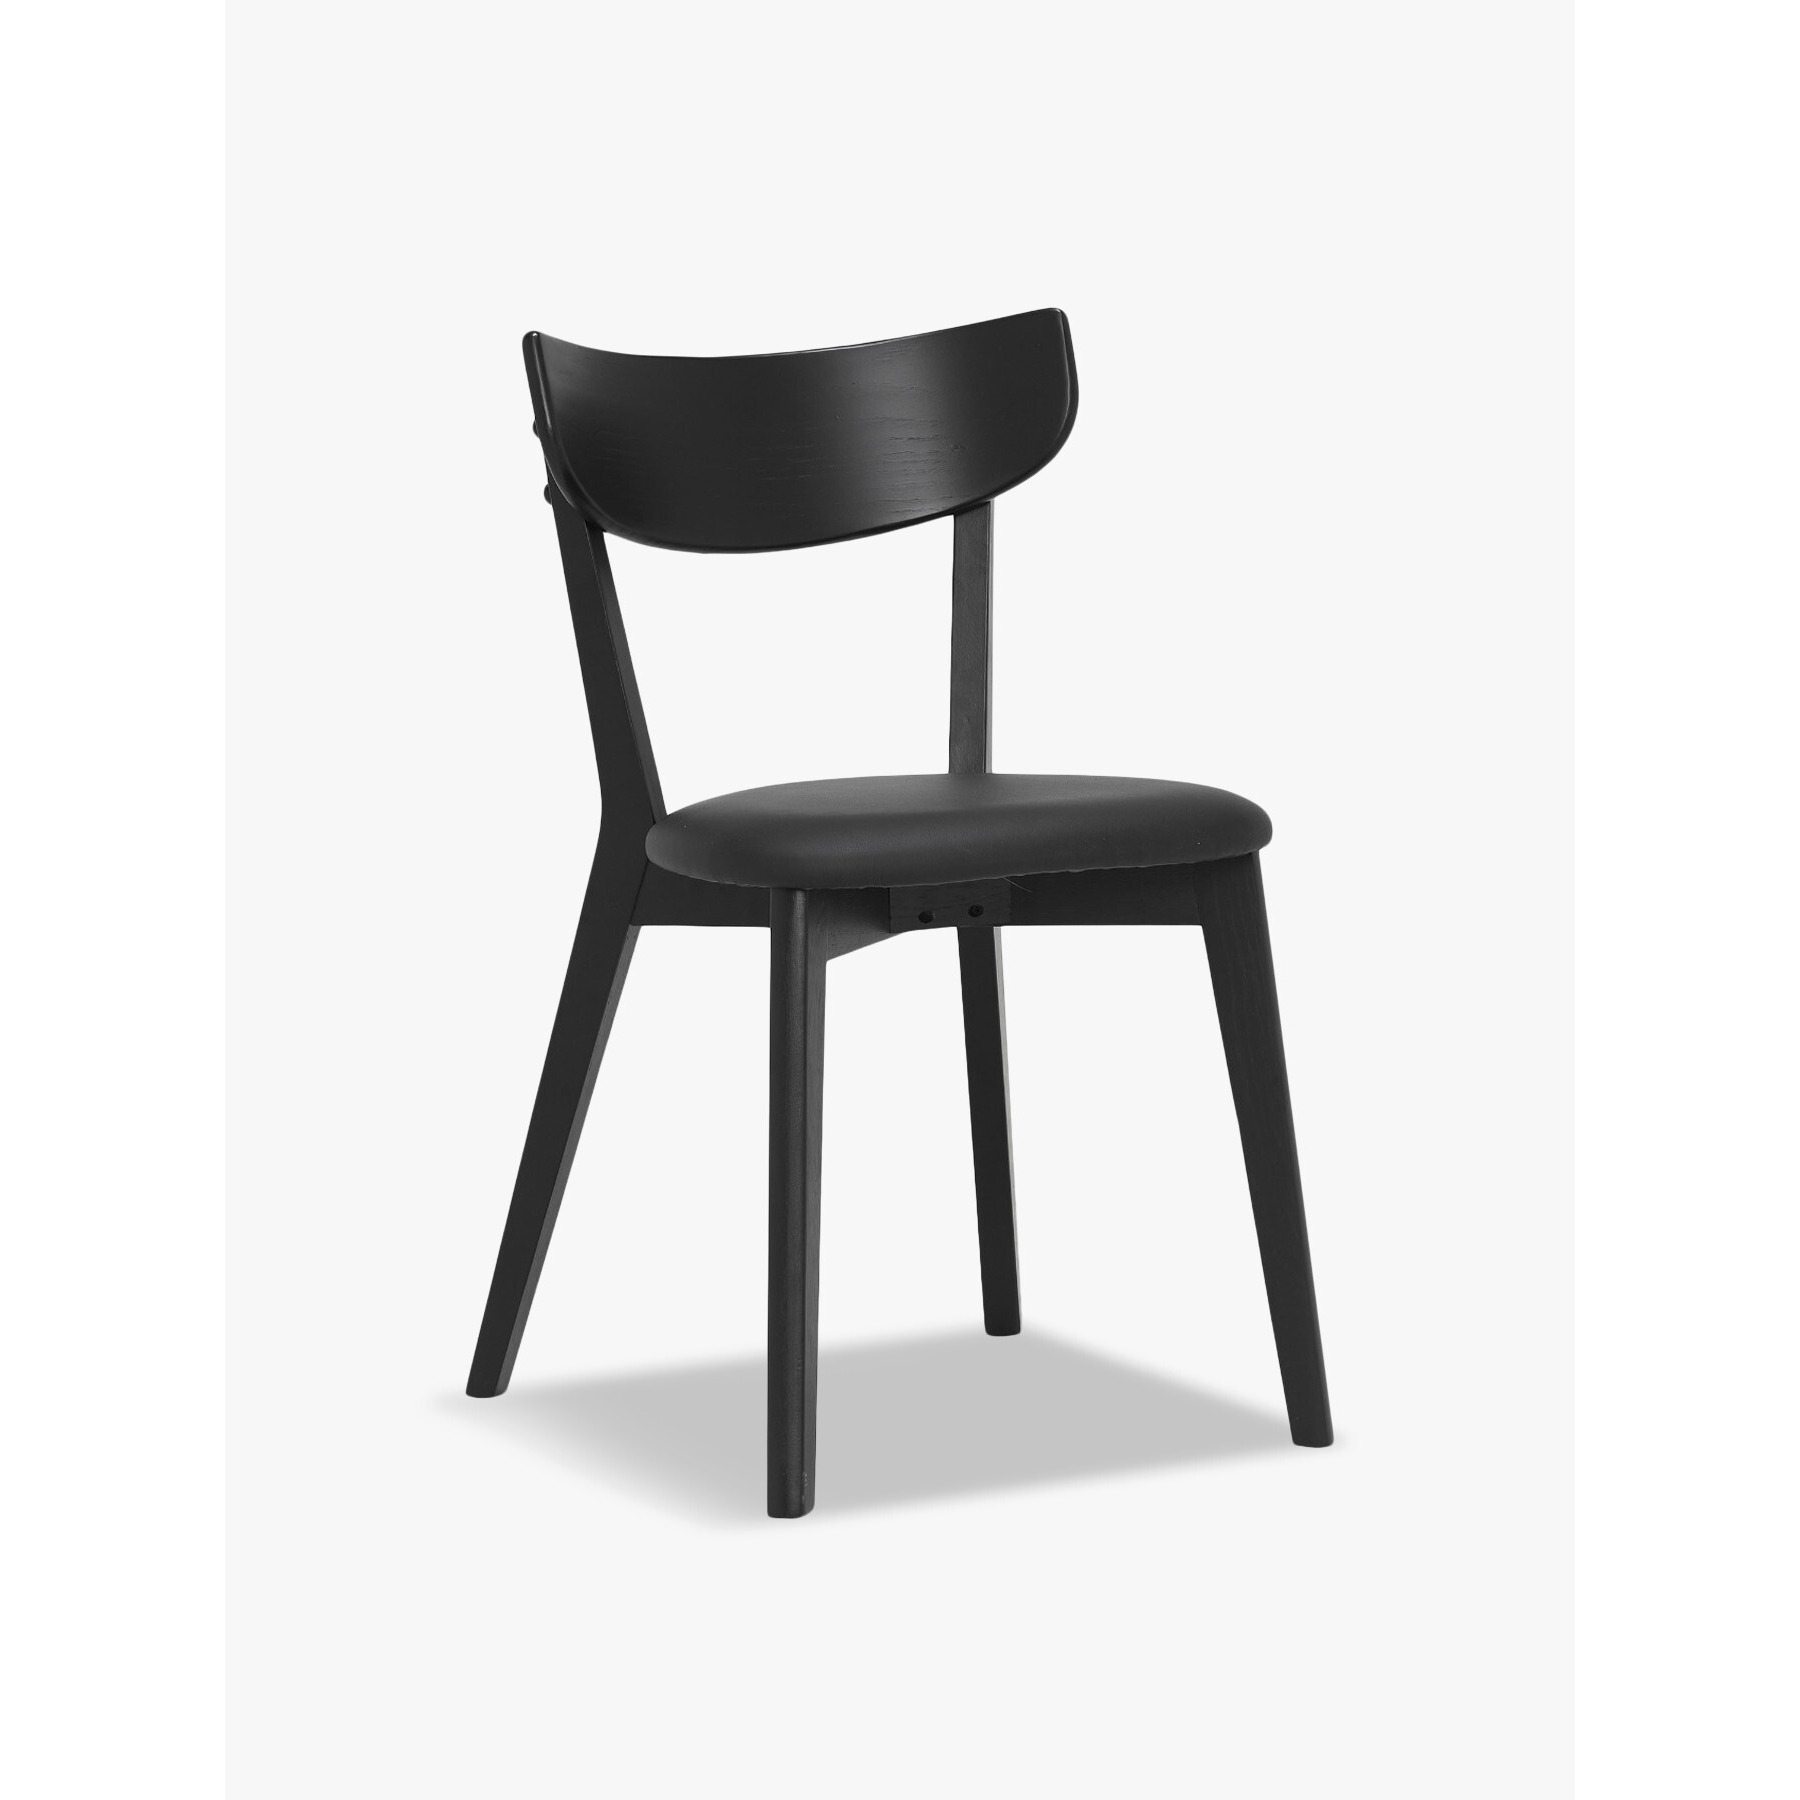 Barker and Stonehouse Jessa Dining Chair, Black - image 1